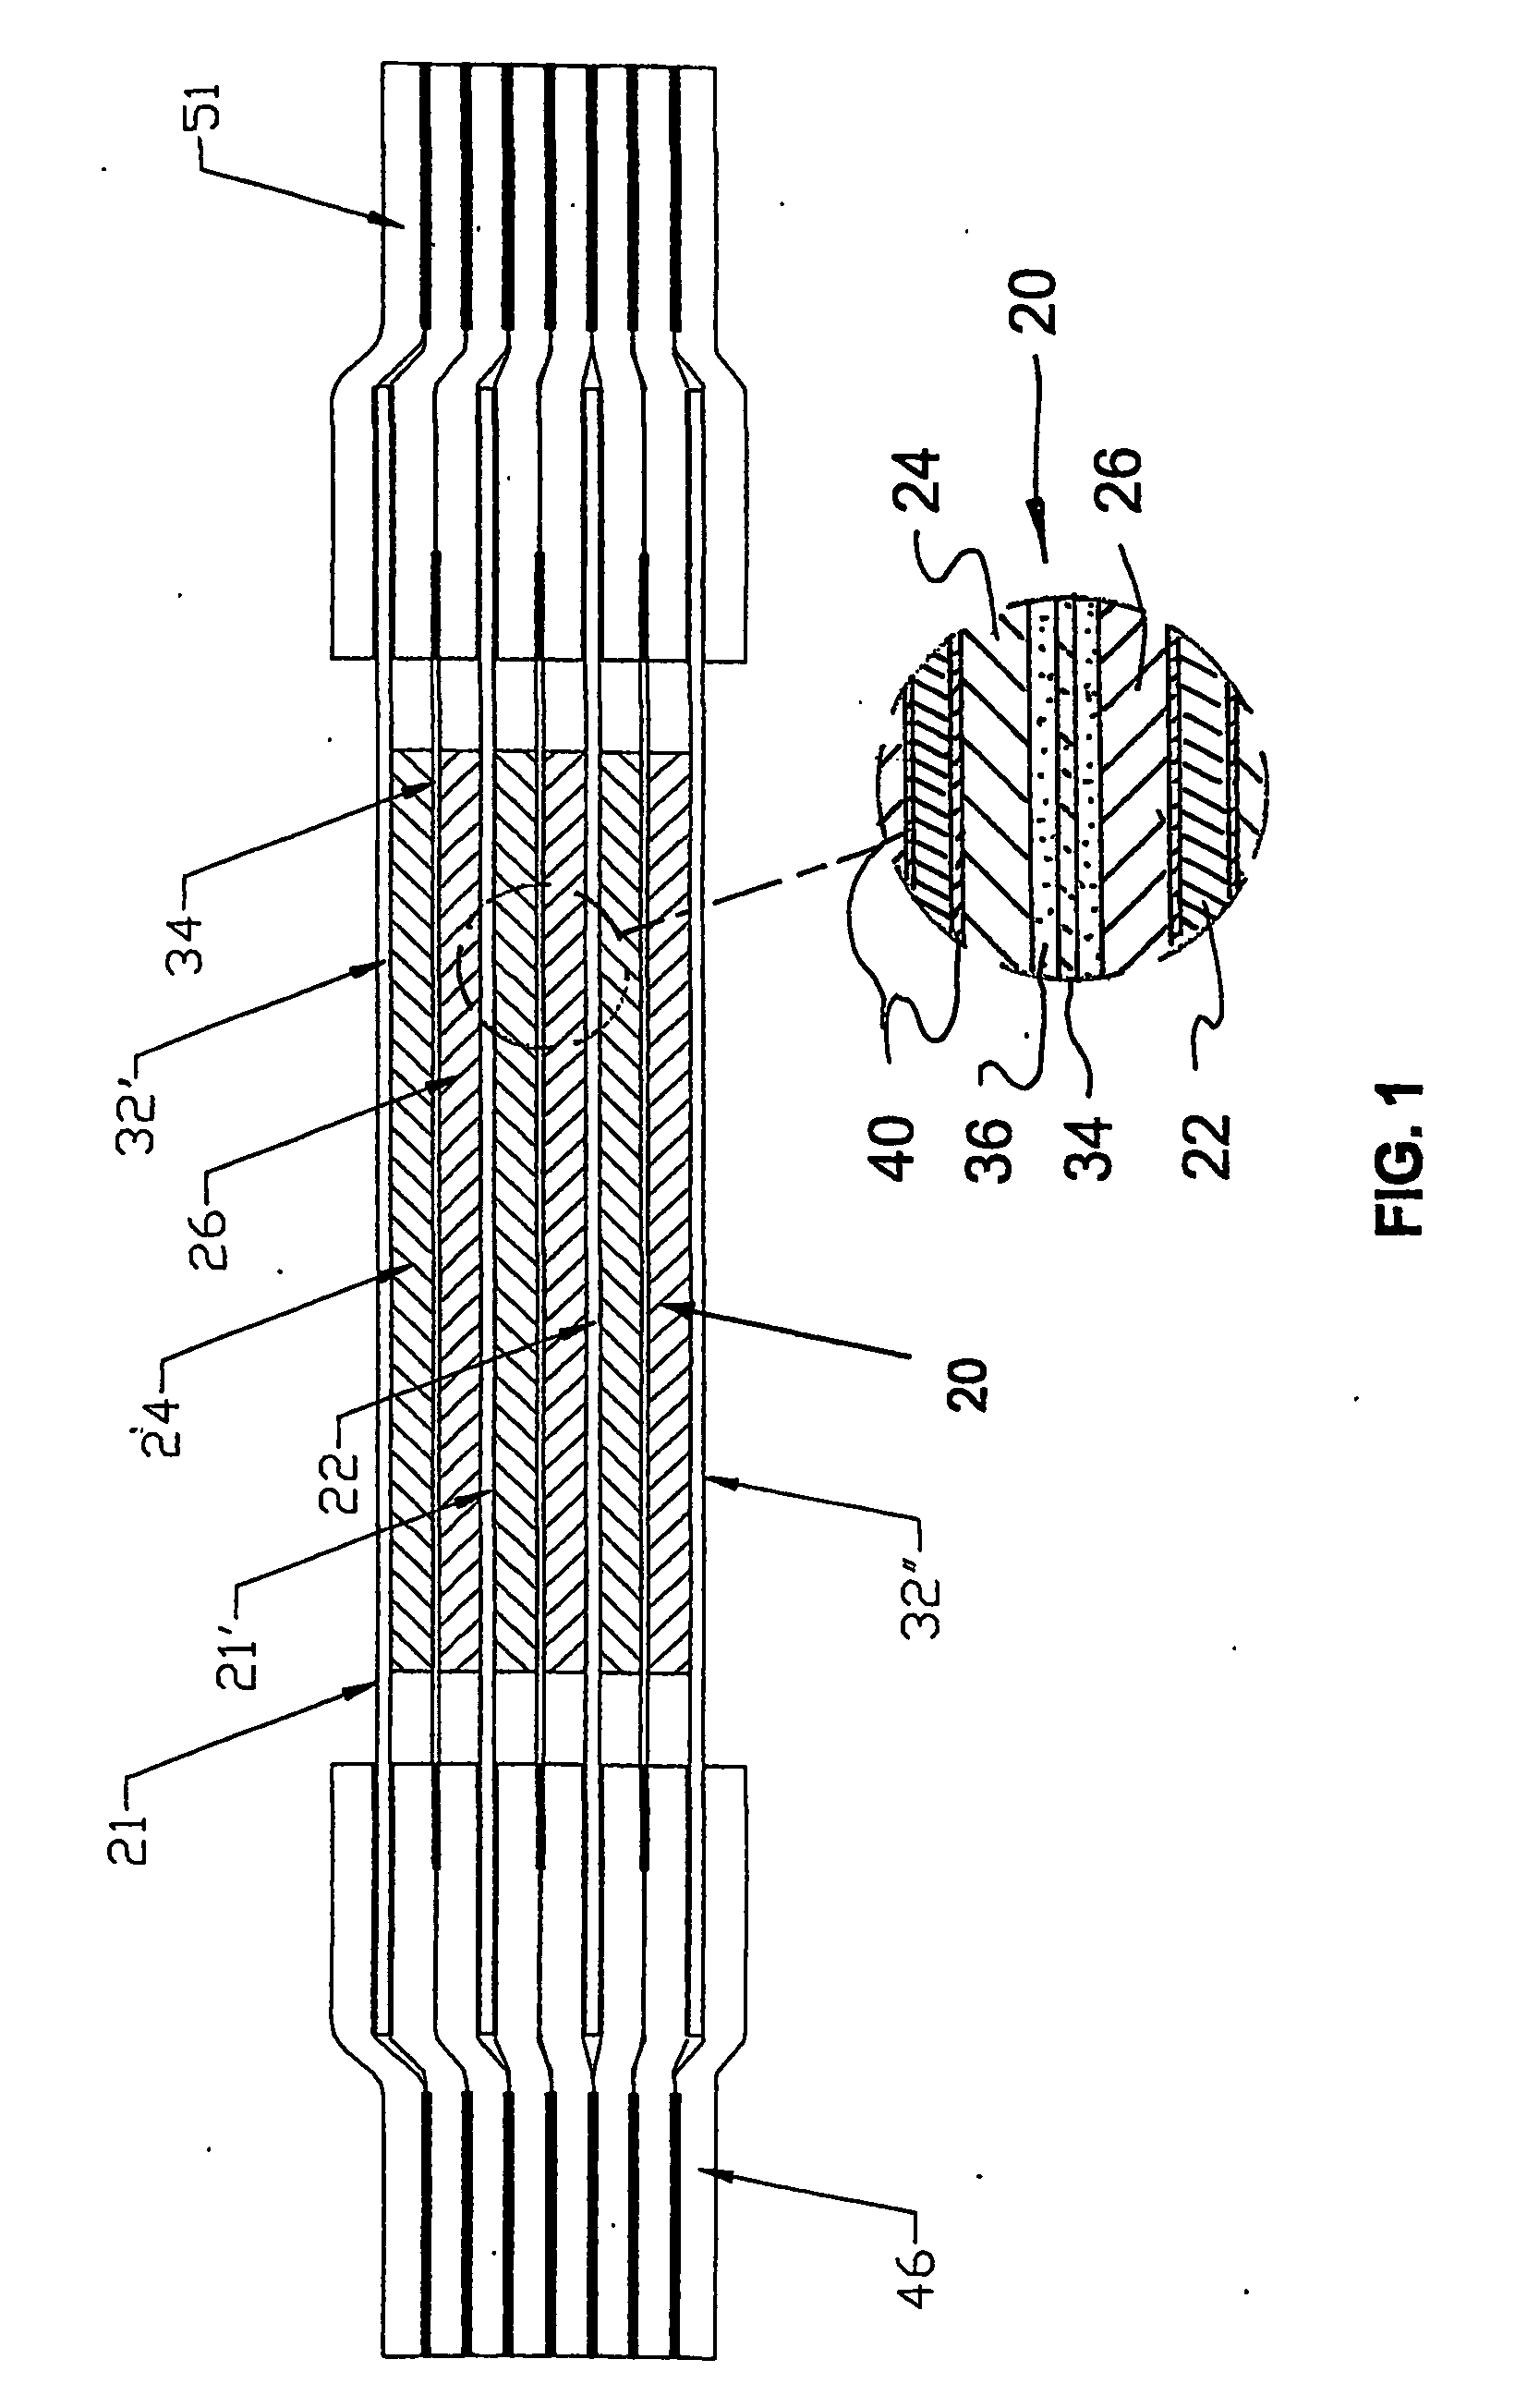 Rechargeable bipolar high power electrochemical device with reduced monitoring requirement